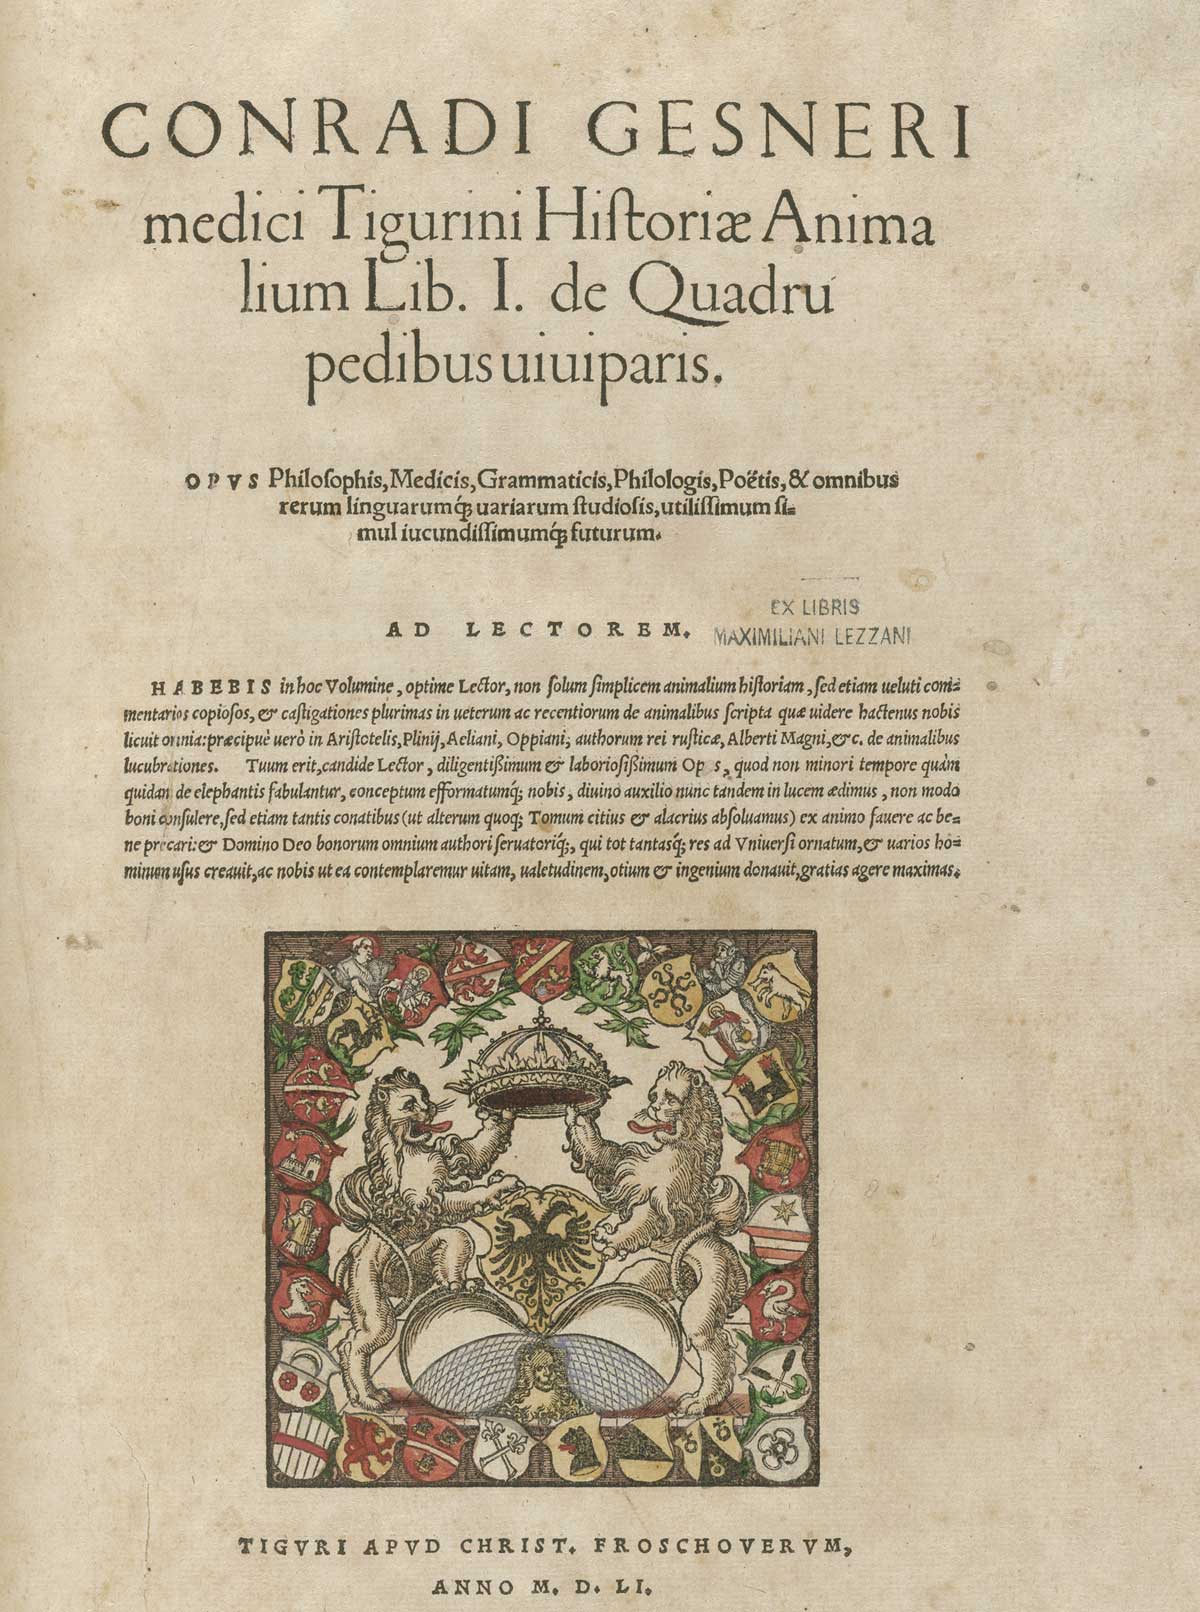 The title page from volume 1 of Conrad Gessner's Conradi Gesneri medici Tigurini Historiae animalium, featuring a colorized coat of arms at the bottom of the page.